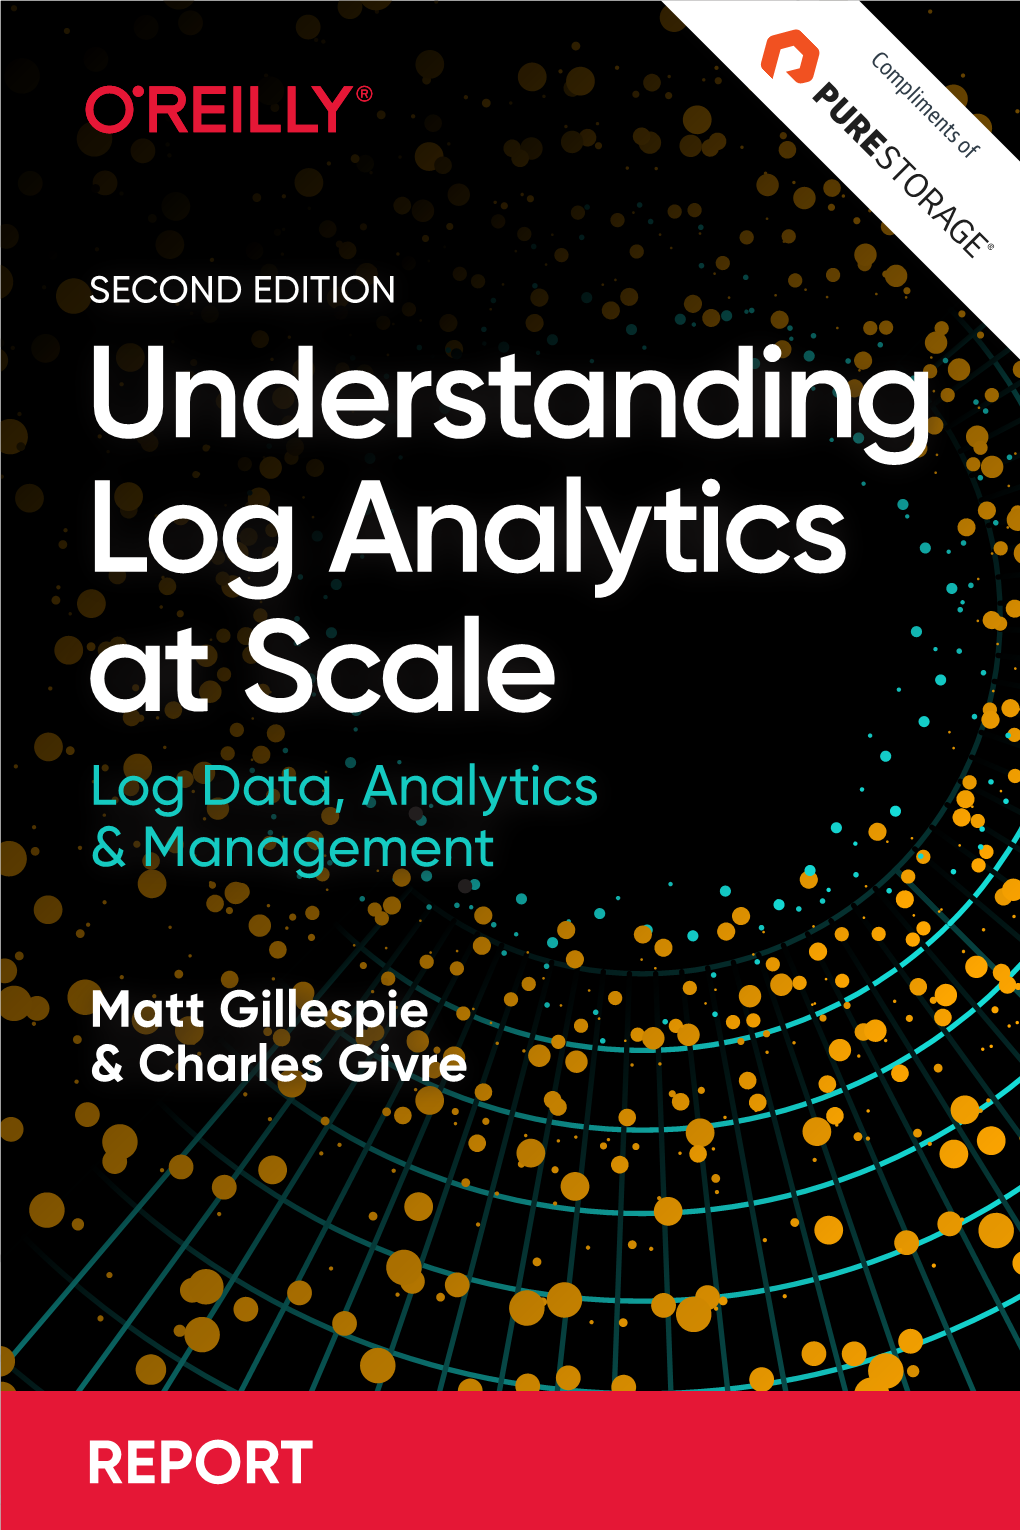 Understanding Log Analytics at Scale O'reilly Report | Pure Storage